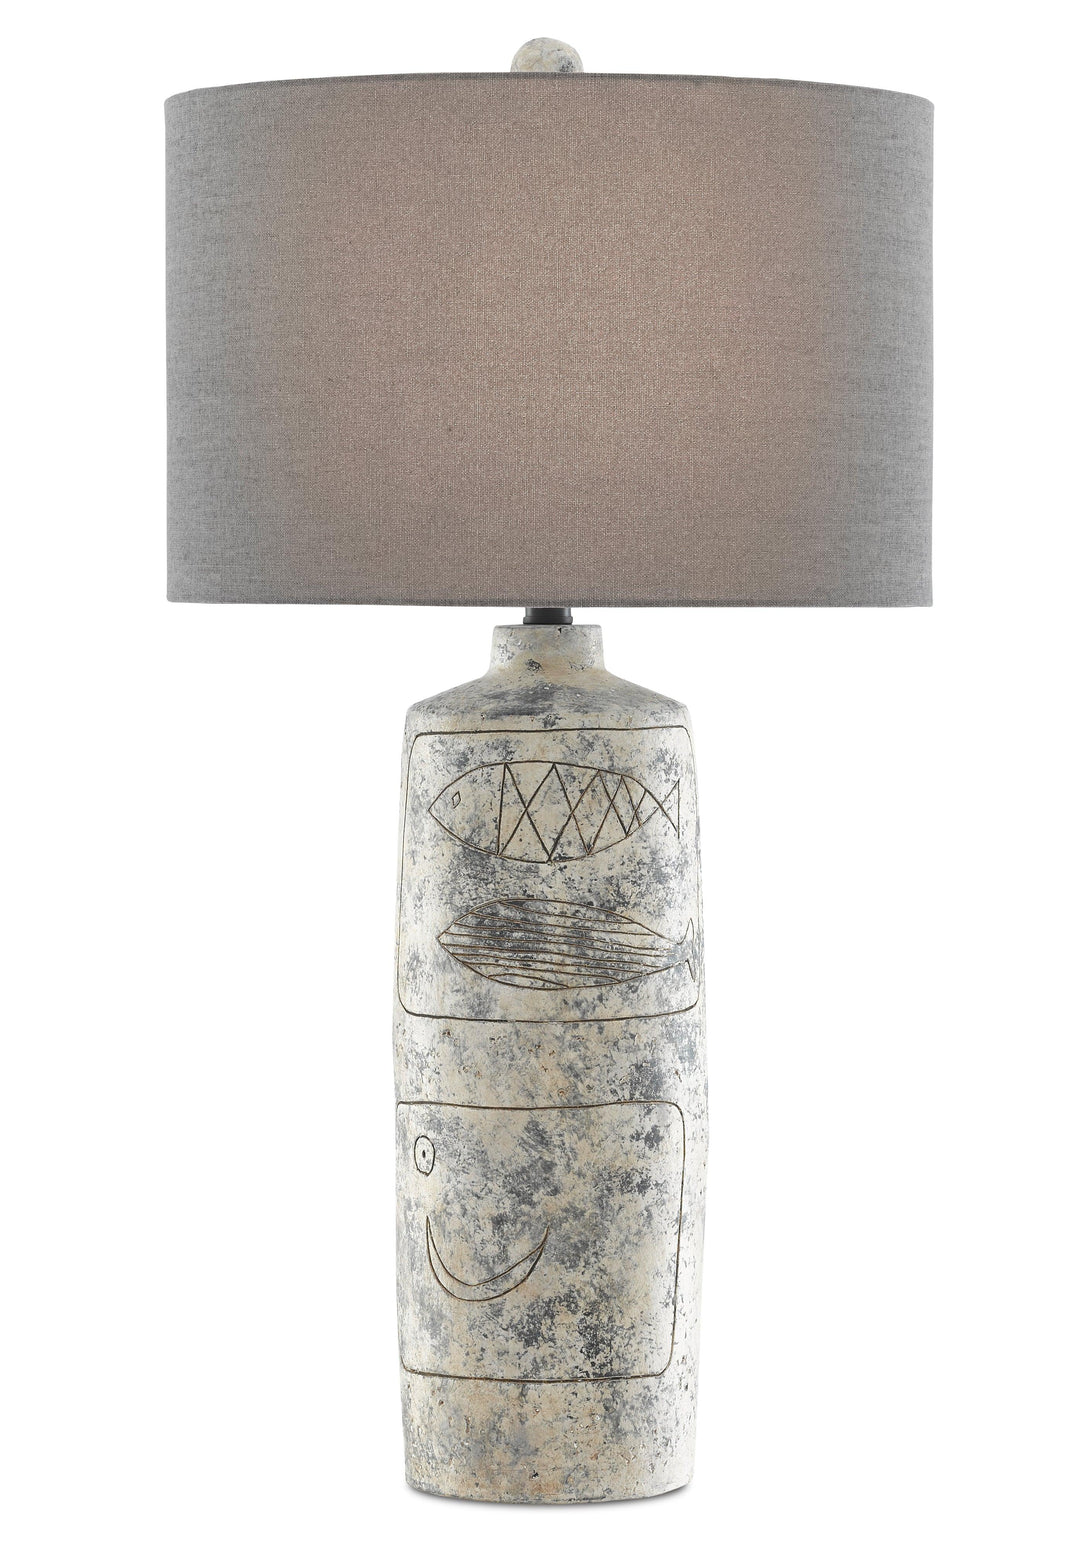 Sikes Table Lamp - Casey & Company